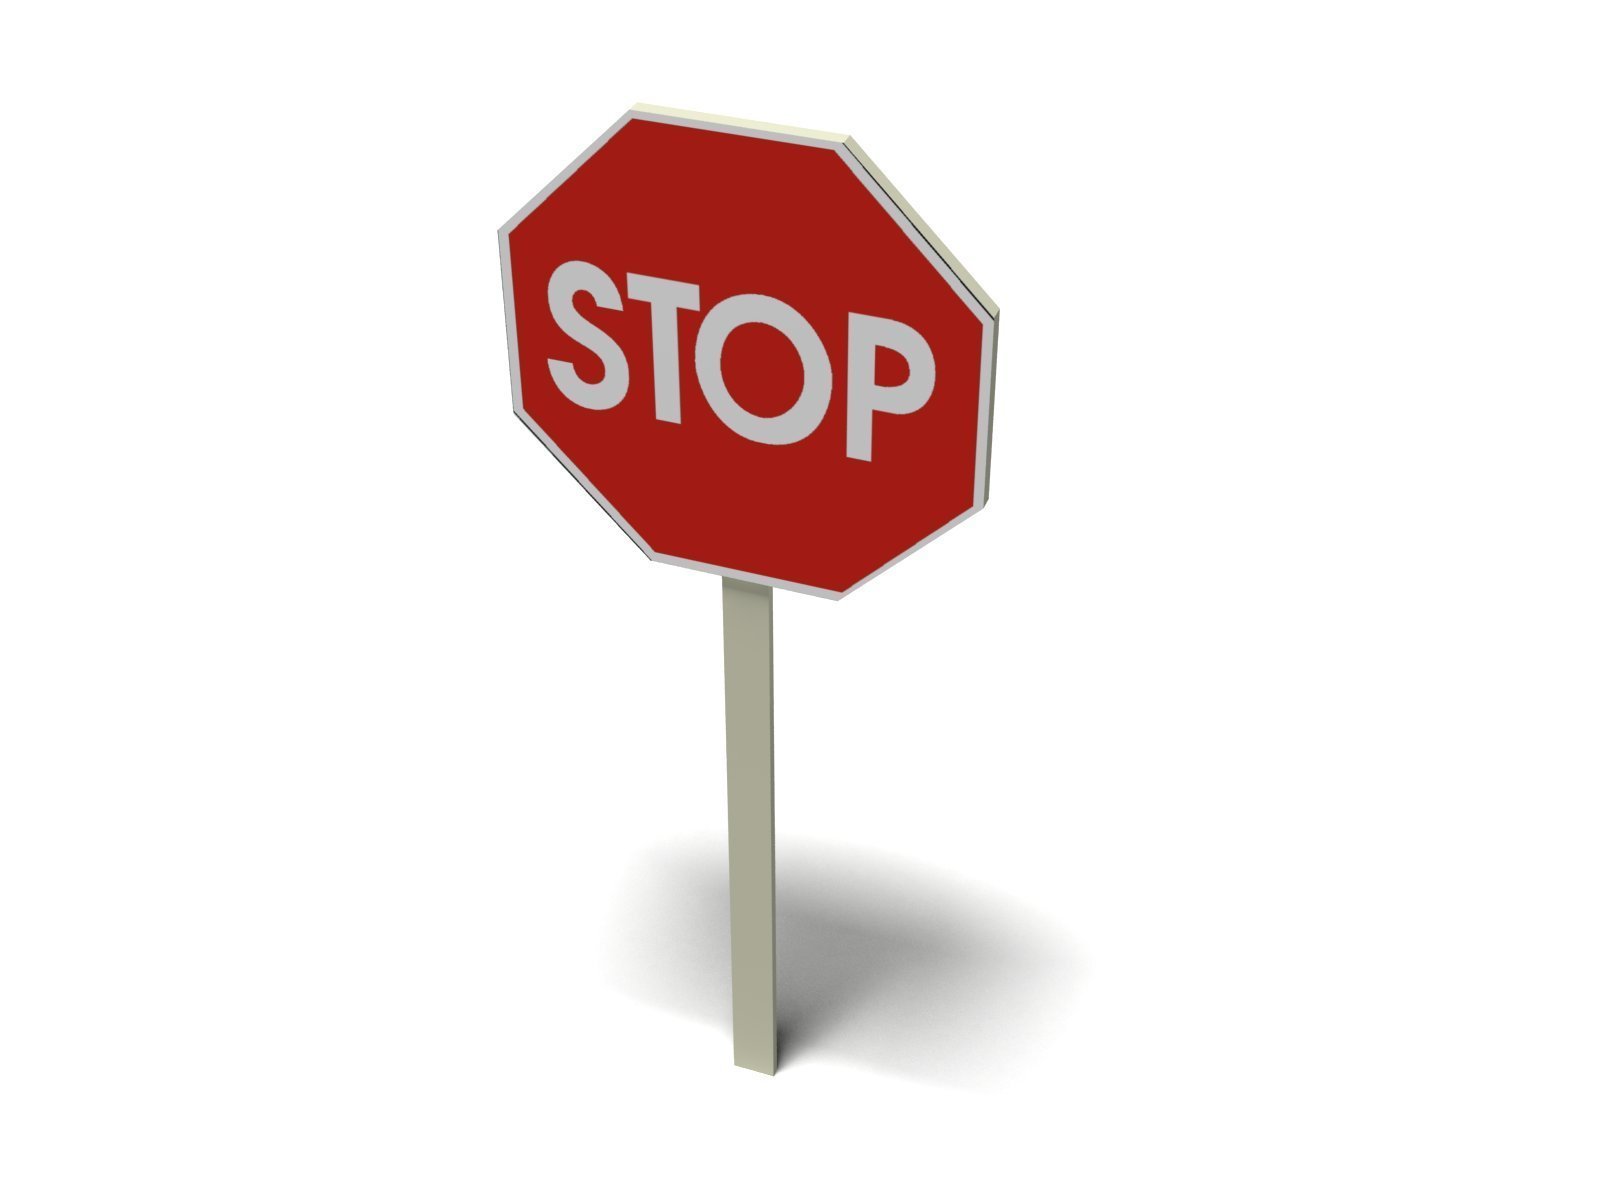 Stop sign image clipart 2